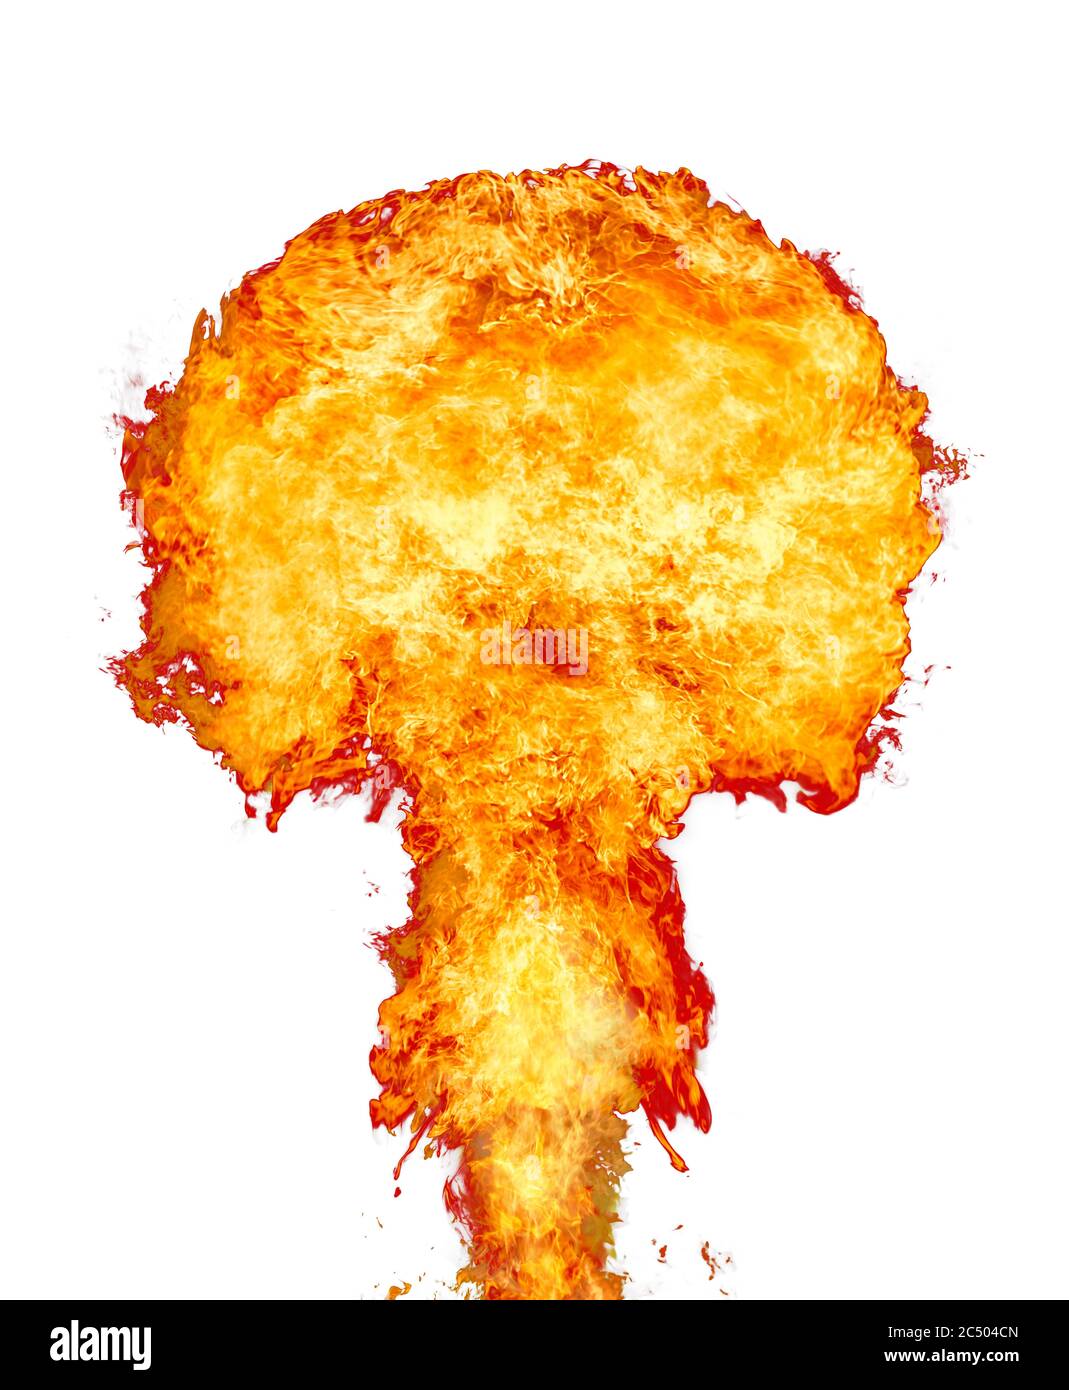 Explosion - fire mushroom. Mushroom cloud fireball from an explosion. Nuclear explosion. Symbol of environmental protection and the dangers of nuclear Stock Photo